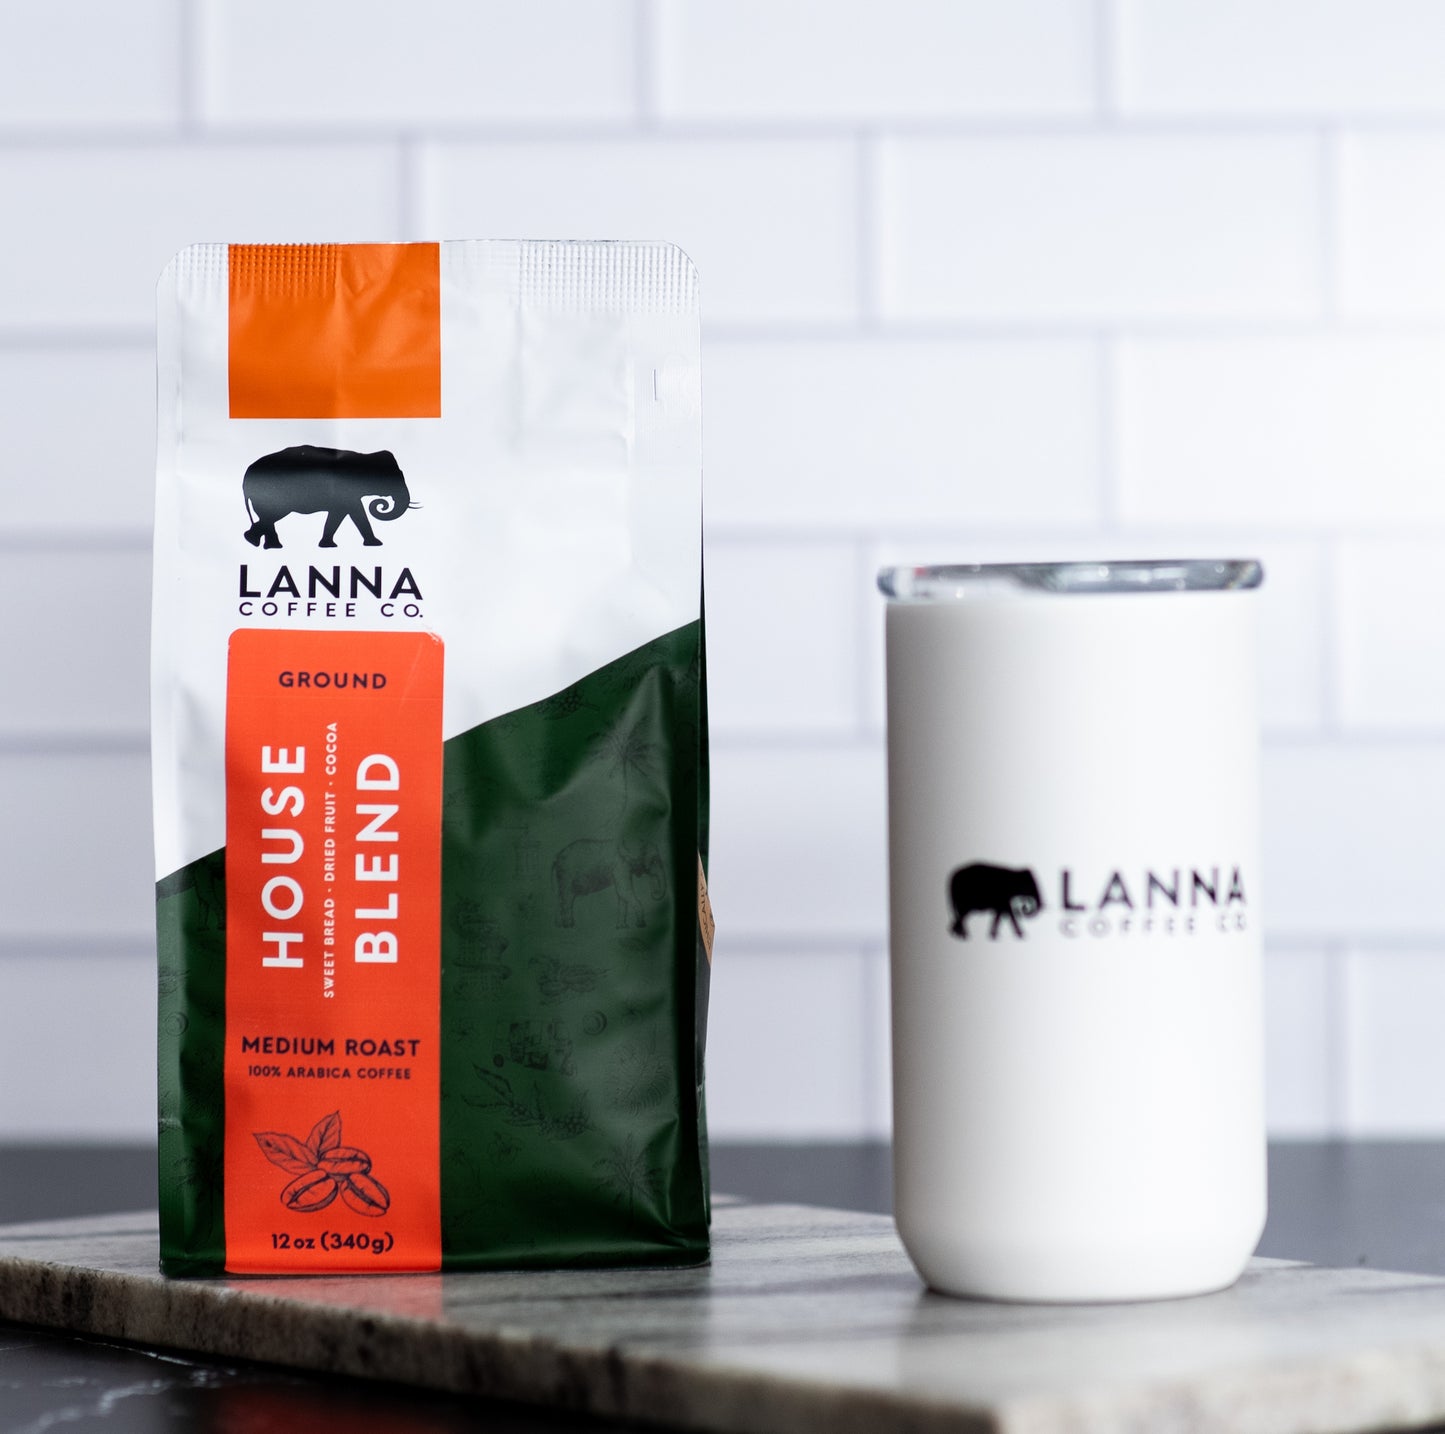 Lanna Coffee ready to drink cold brew coffee